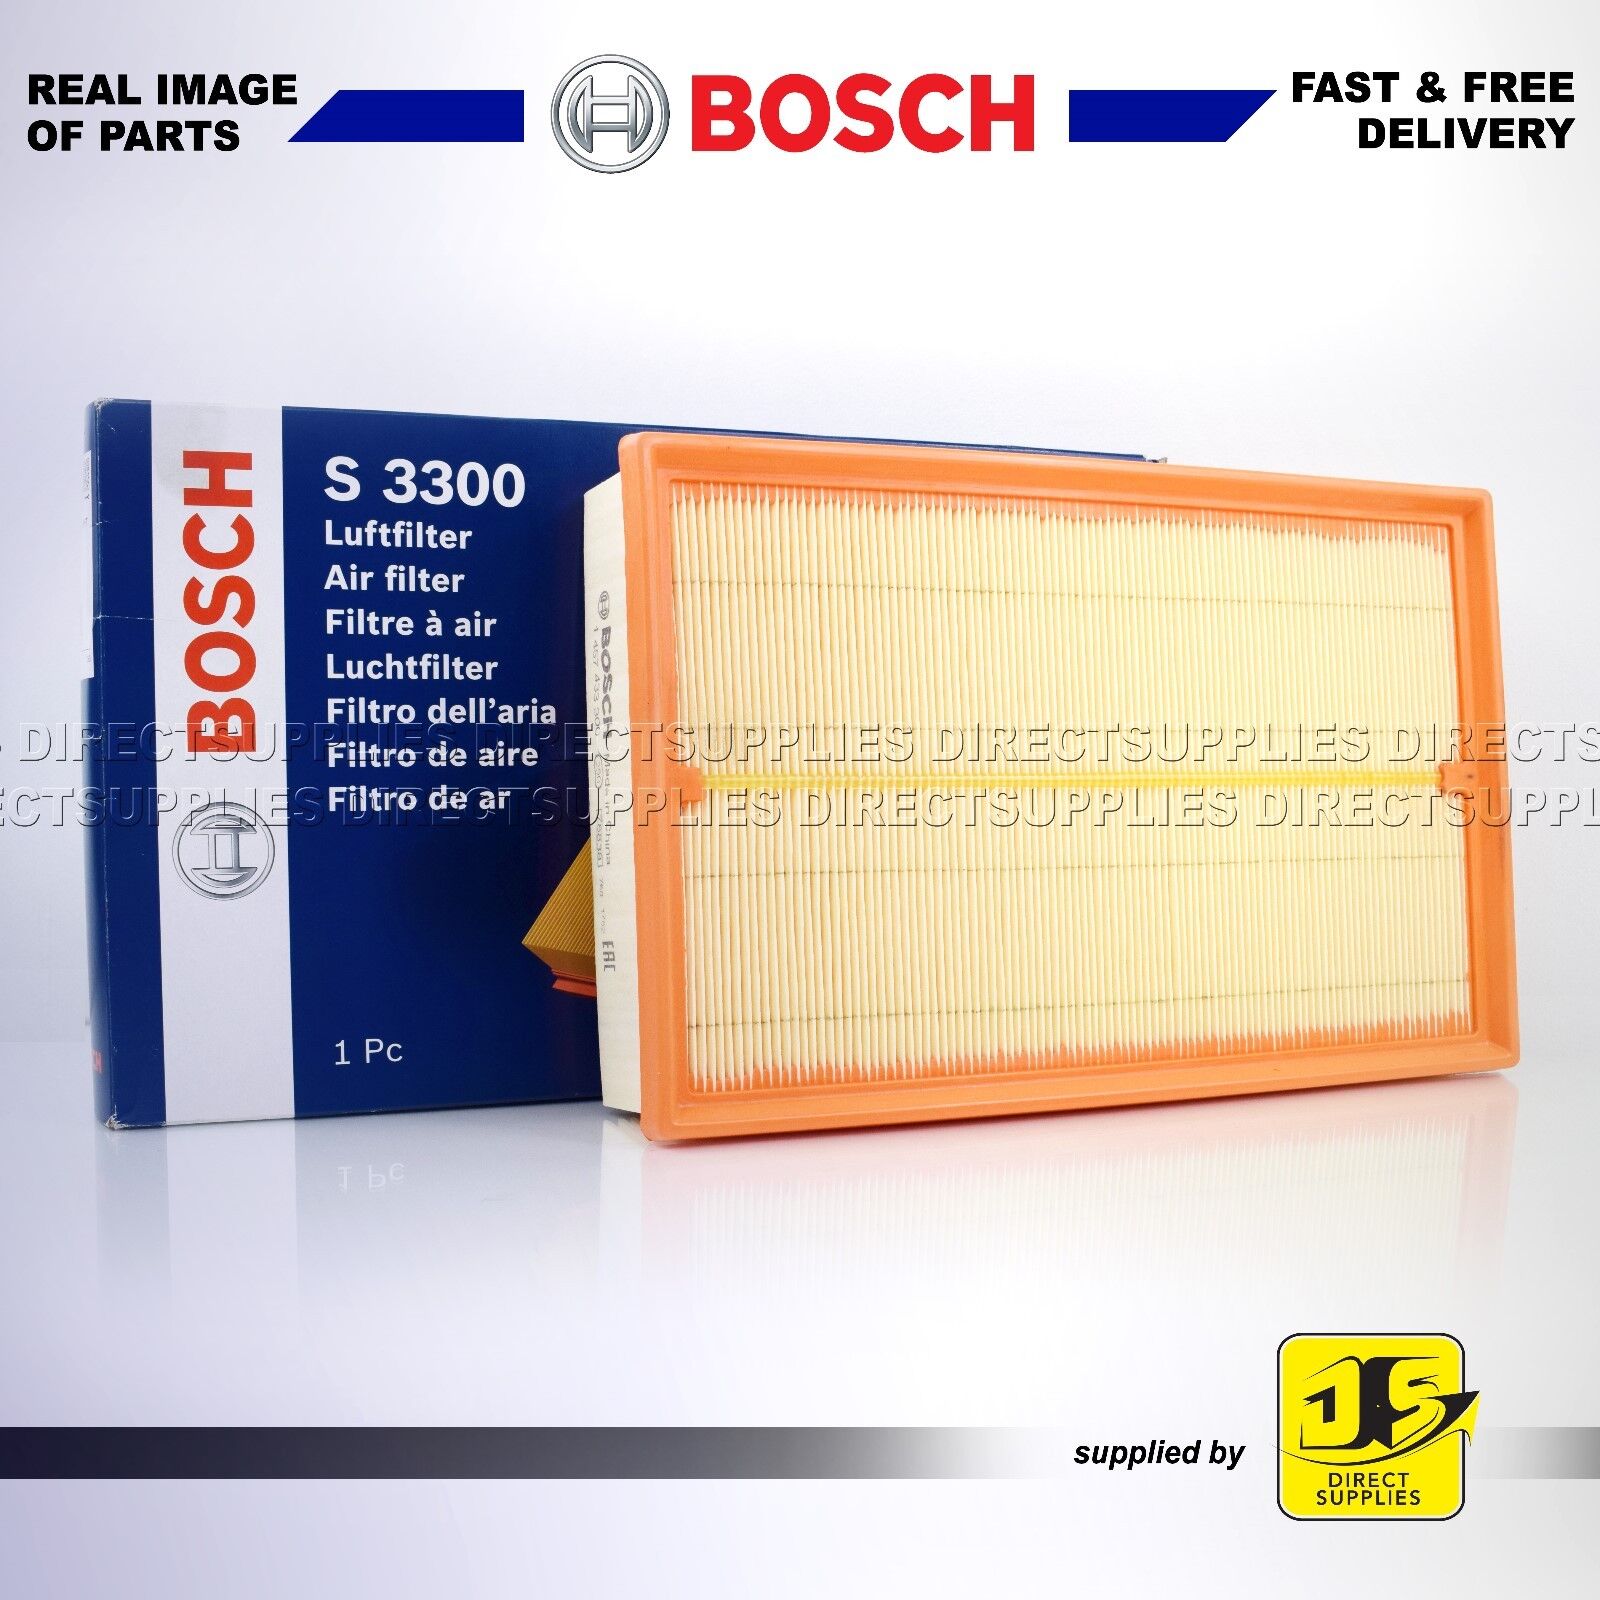 VOLVO S60 2.4 2.5 2.0 2.3 S80 V70 XC70 CROSS COUNTRY BOSCH AIR FILTER S3300